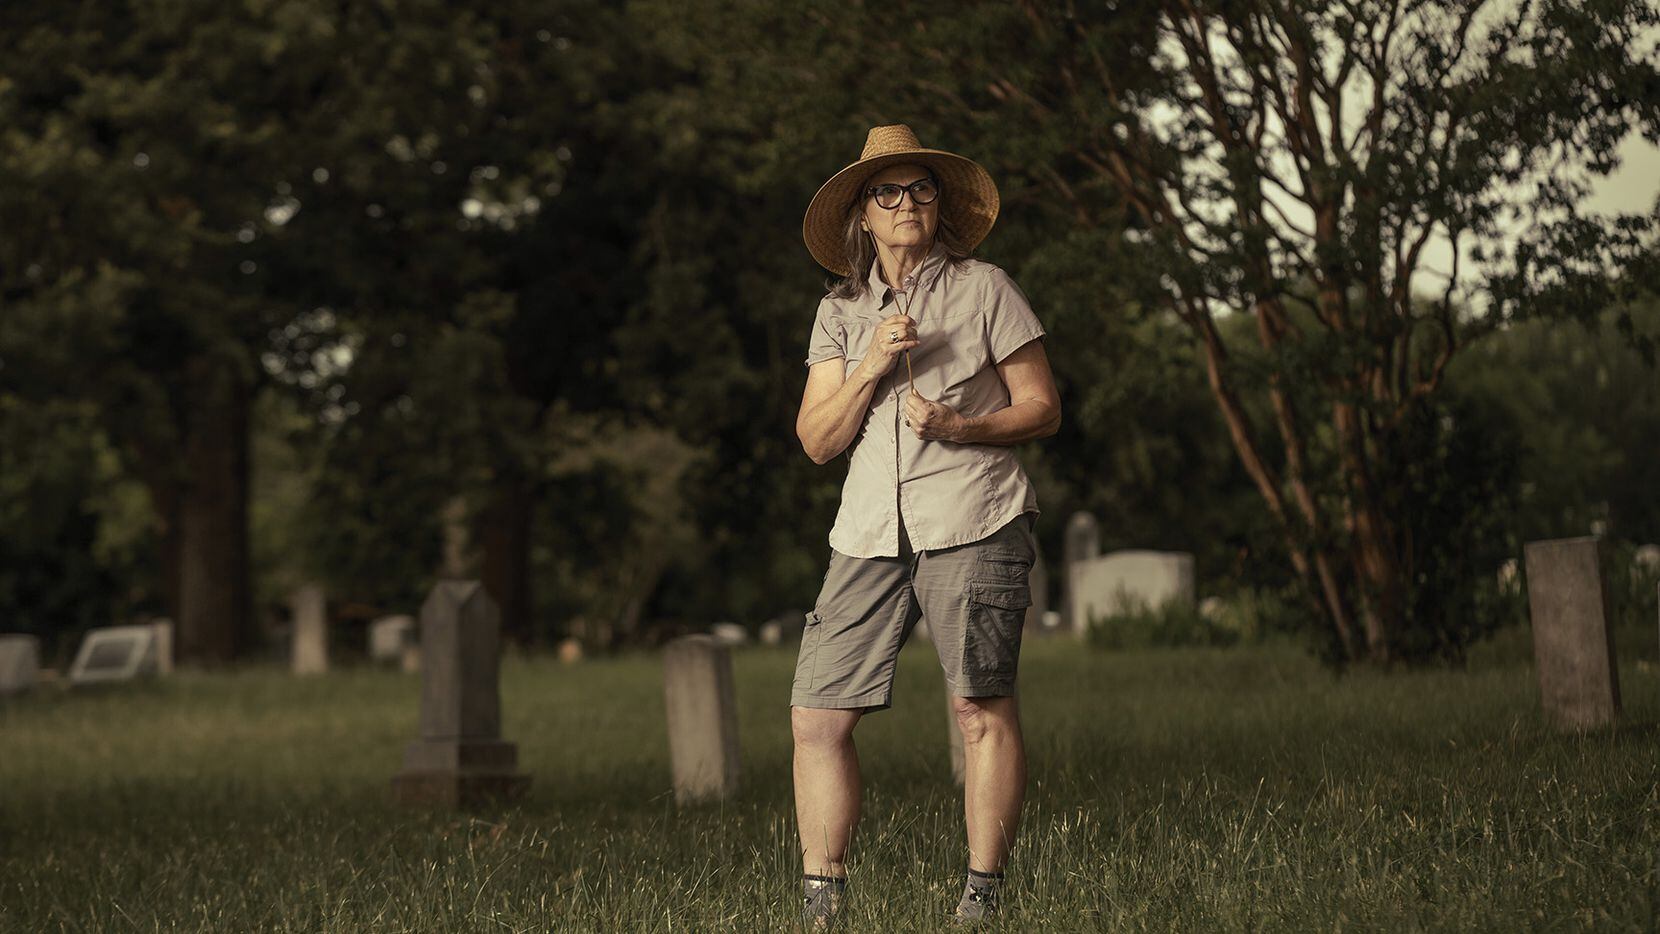 woman in work clothes and wide-brimmed hat surveys a cemetery